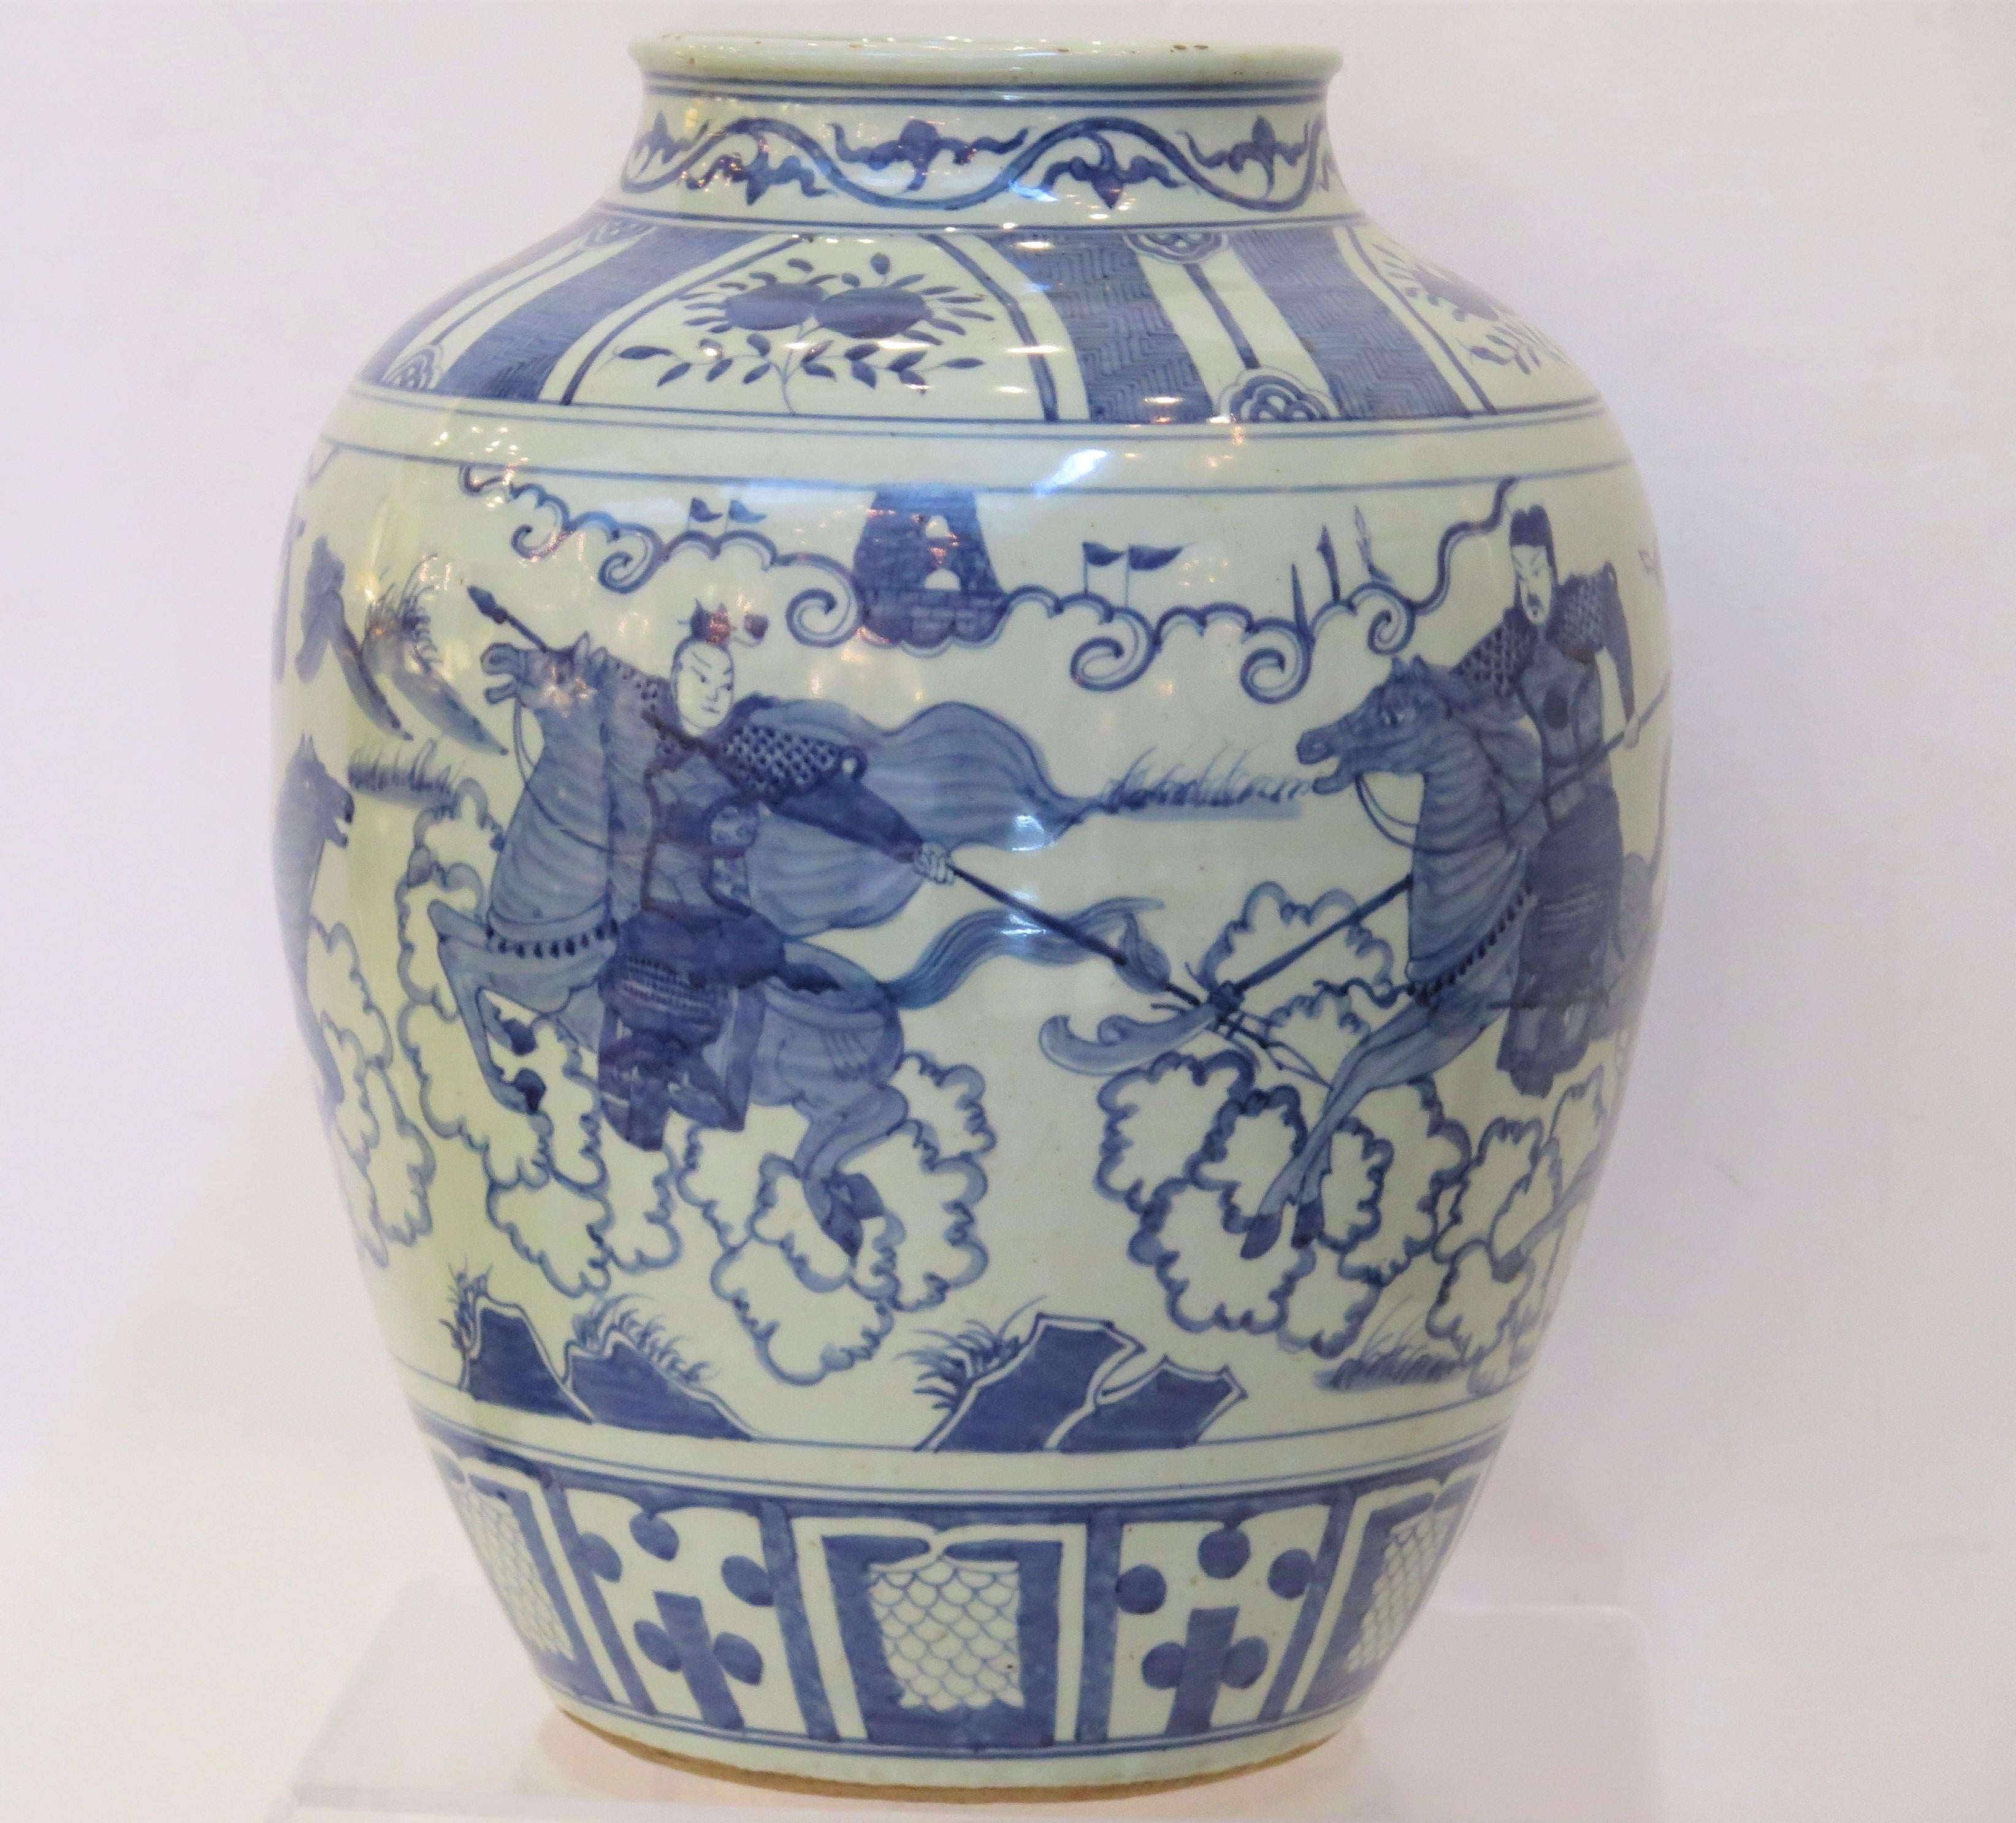 A 19th Century chinese blue and white jarn decorated with men on horseback / warriors.    ( Chinese Porcelain Jar ) 

16.5